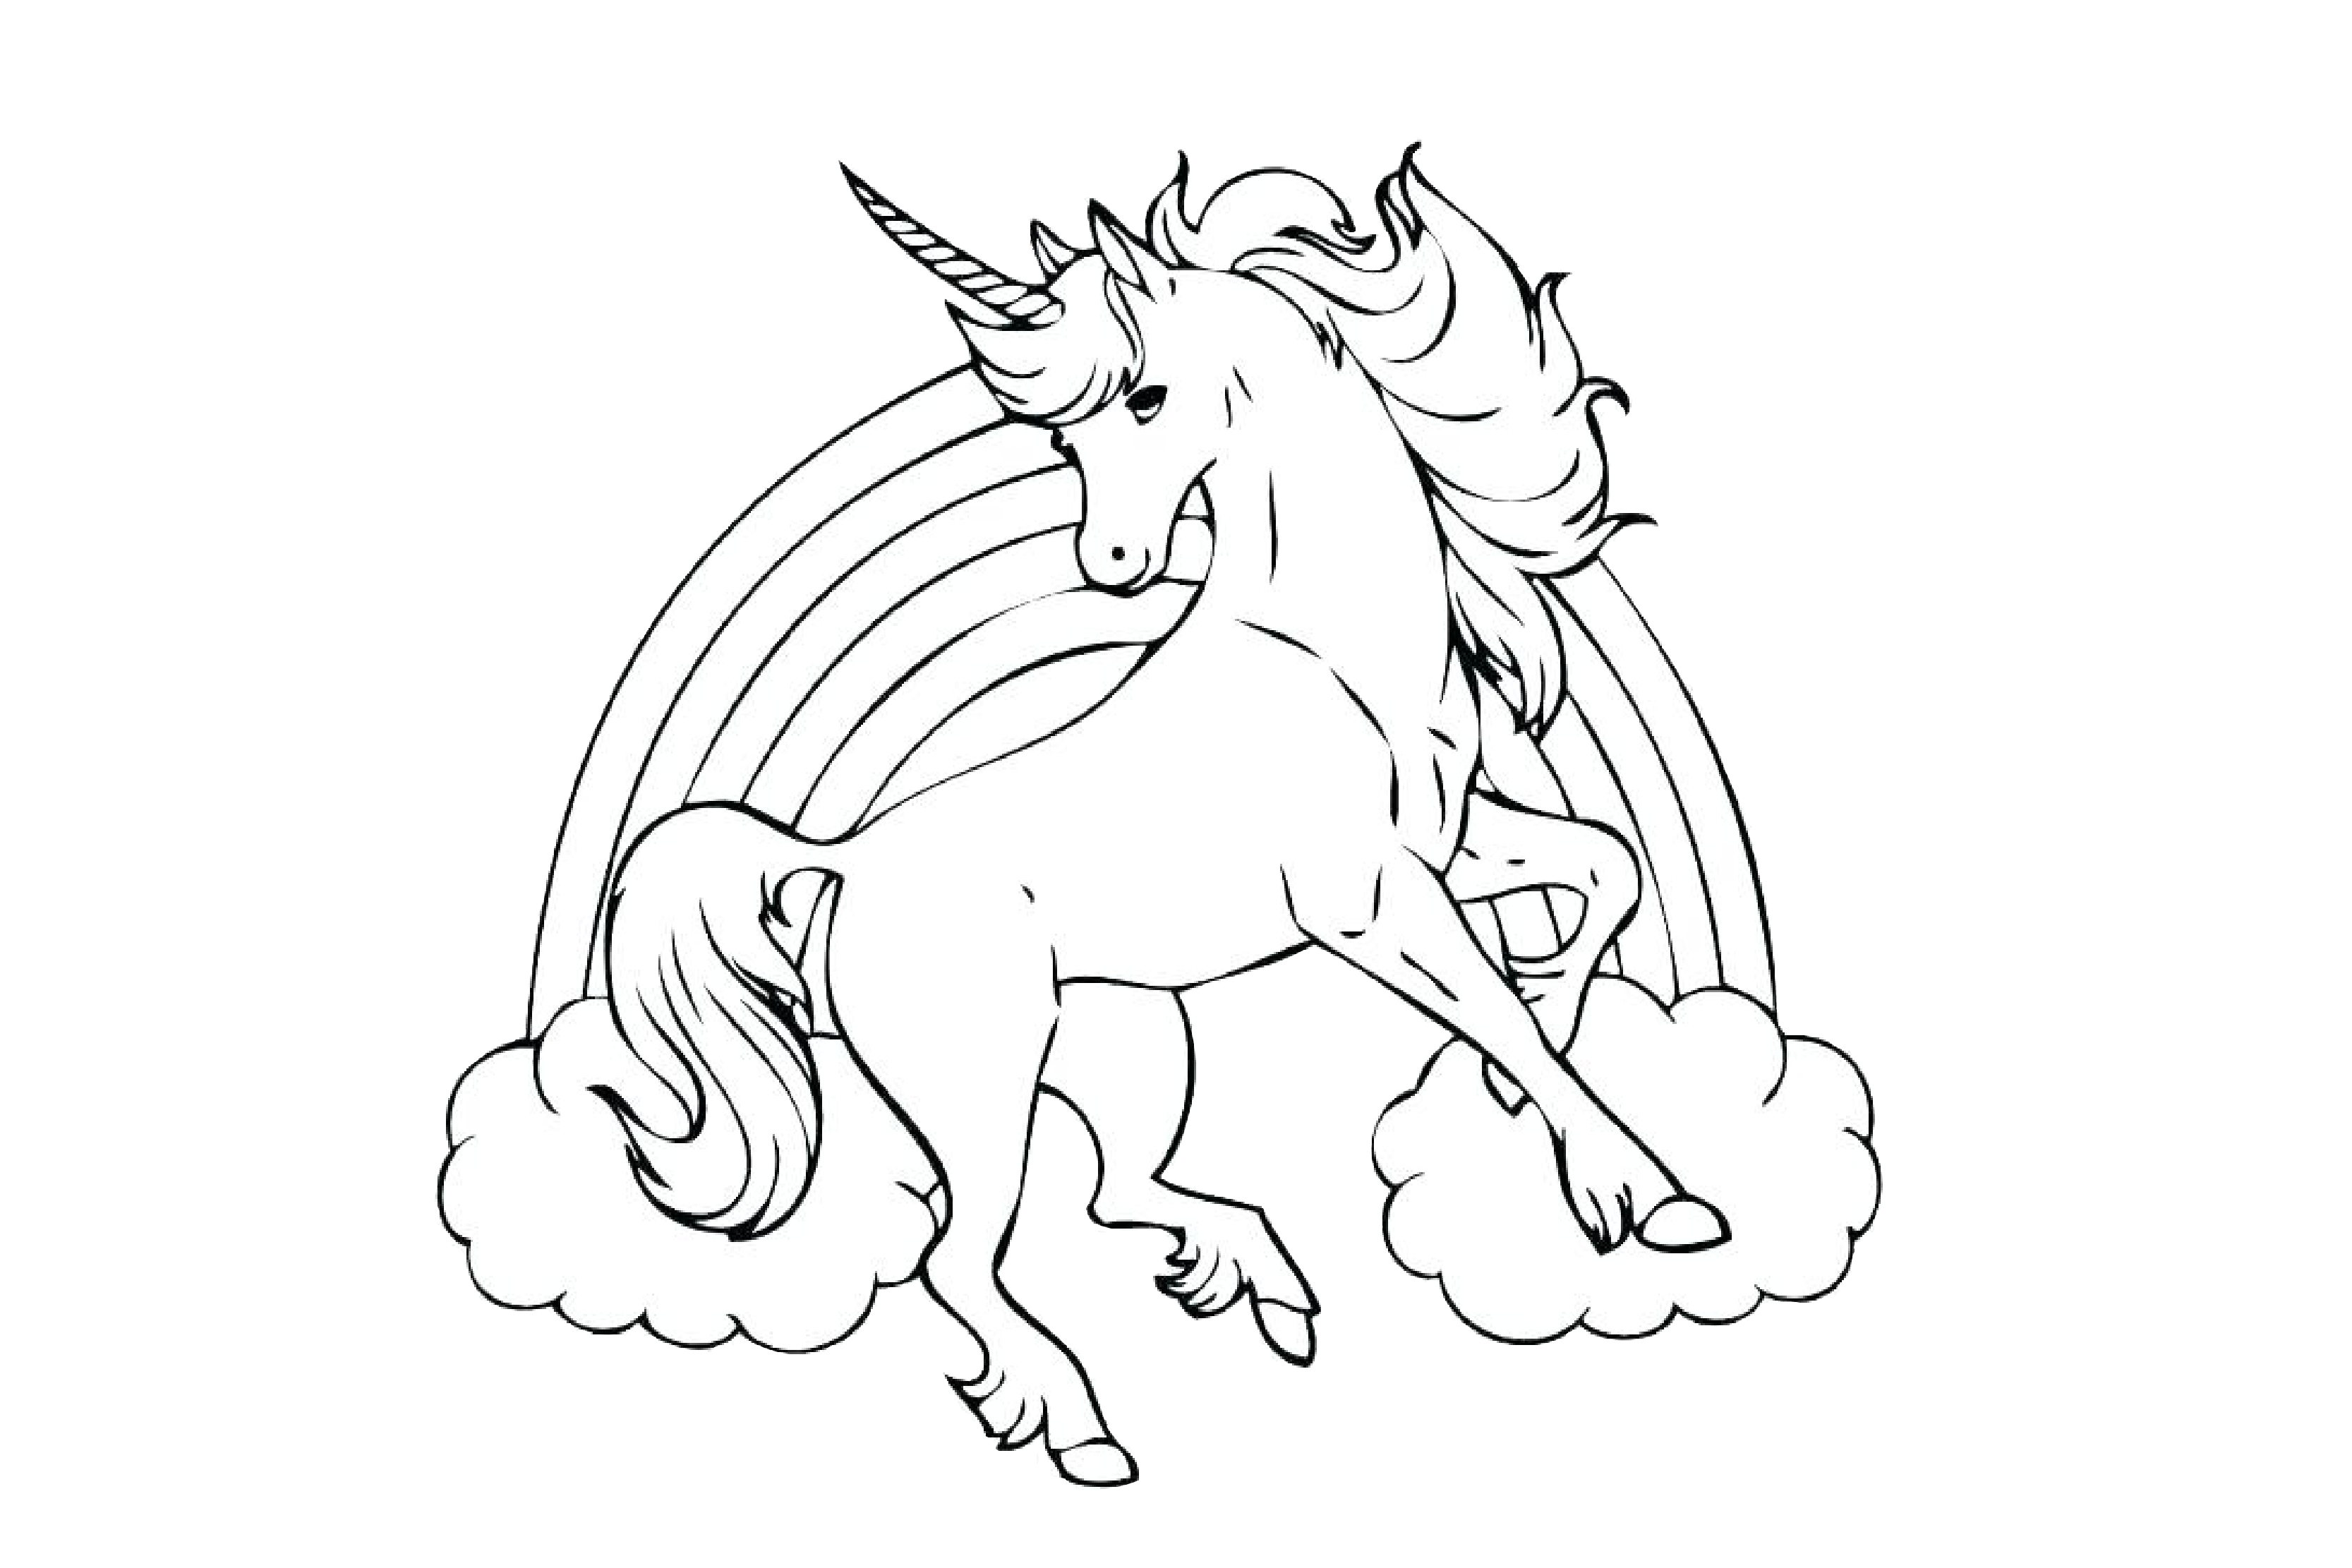 rainbow-unicorn-color-by-number-coloring-pages-coloring-pages